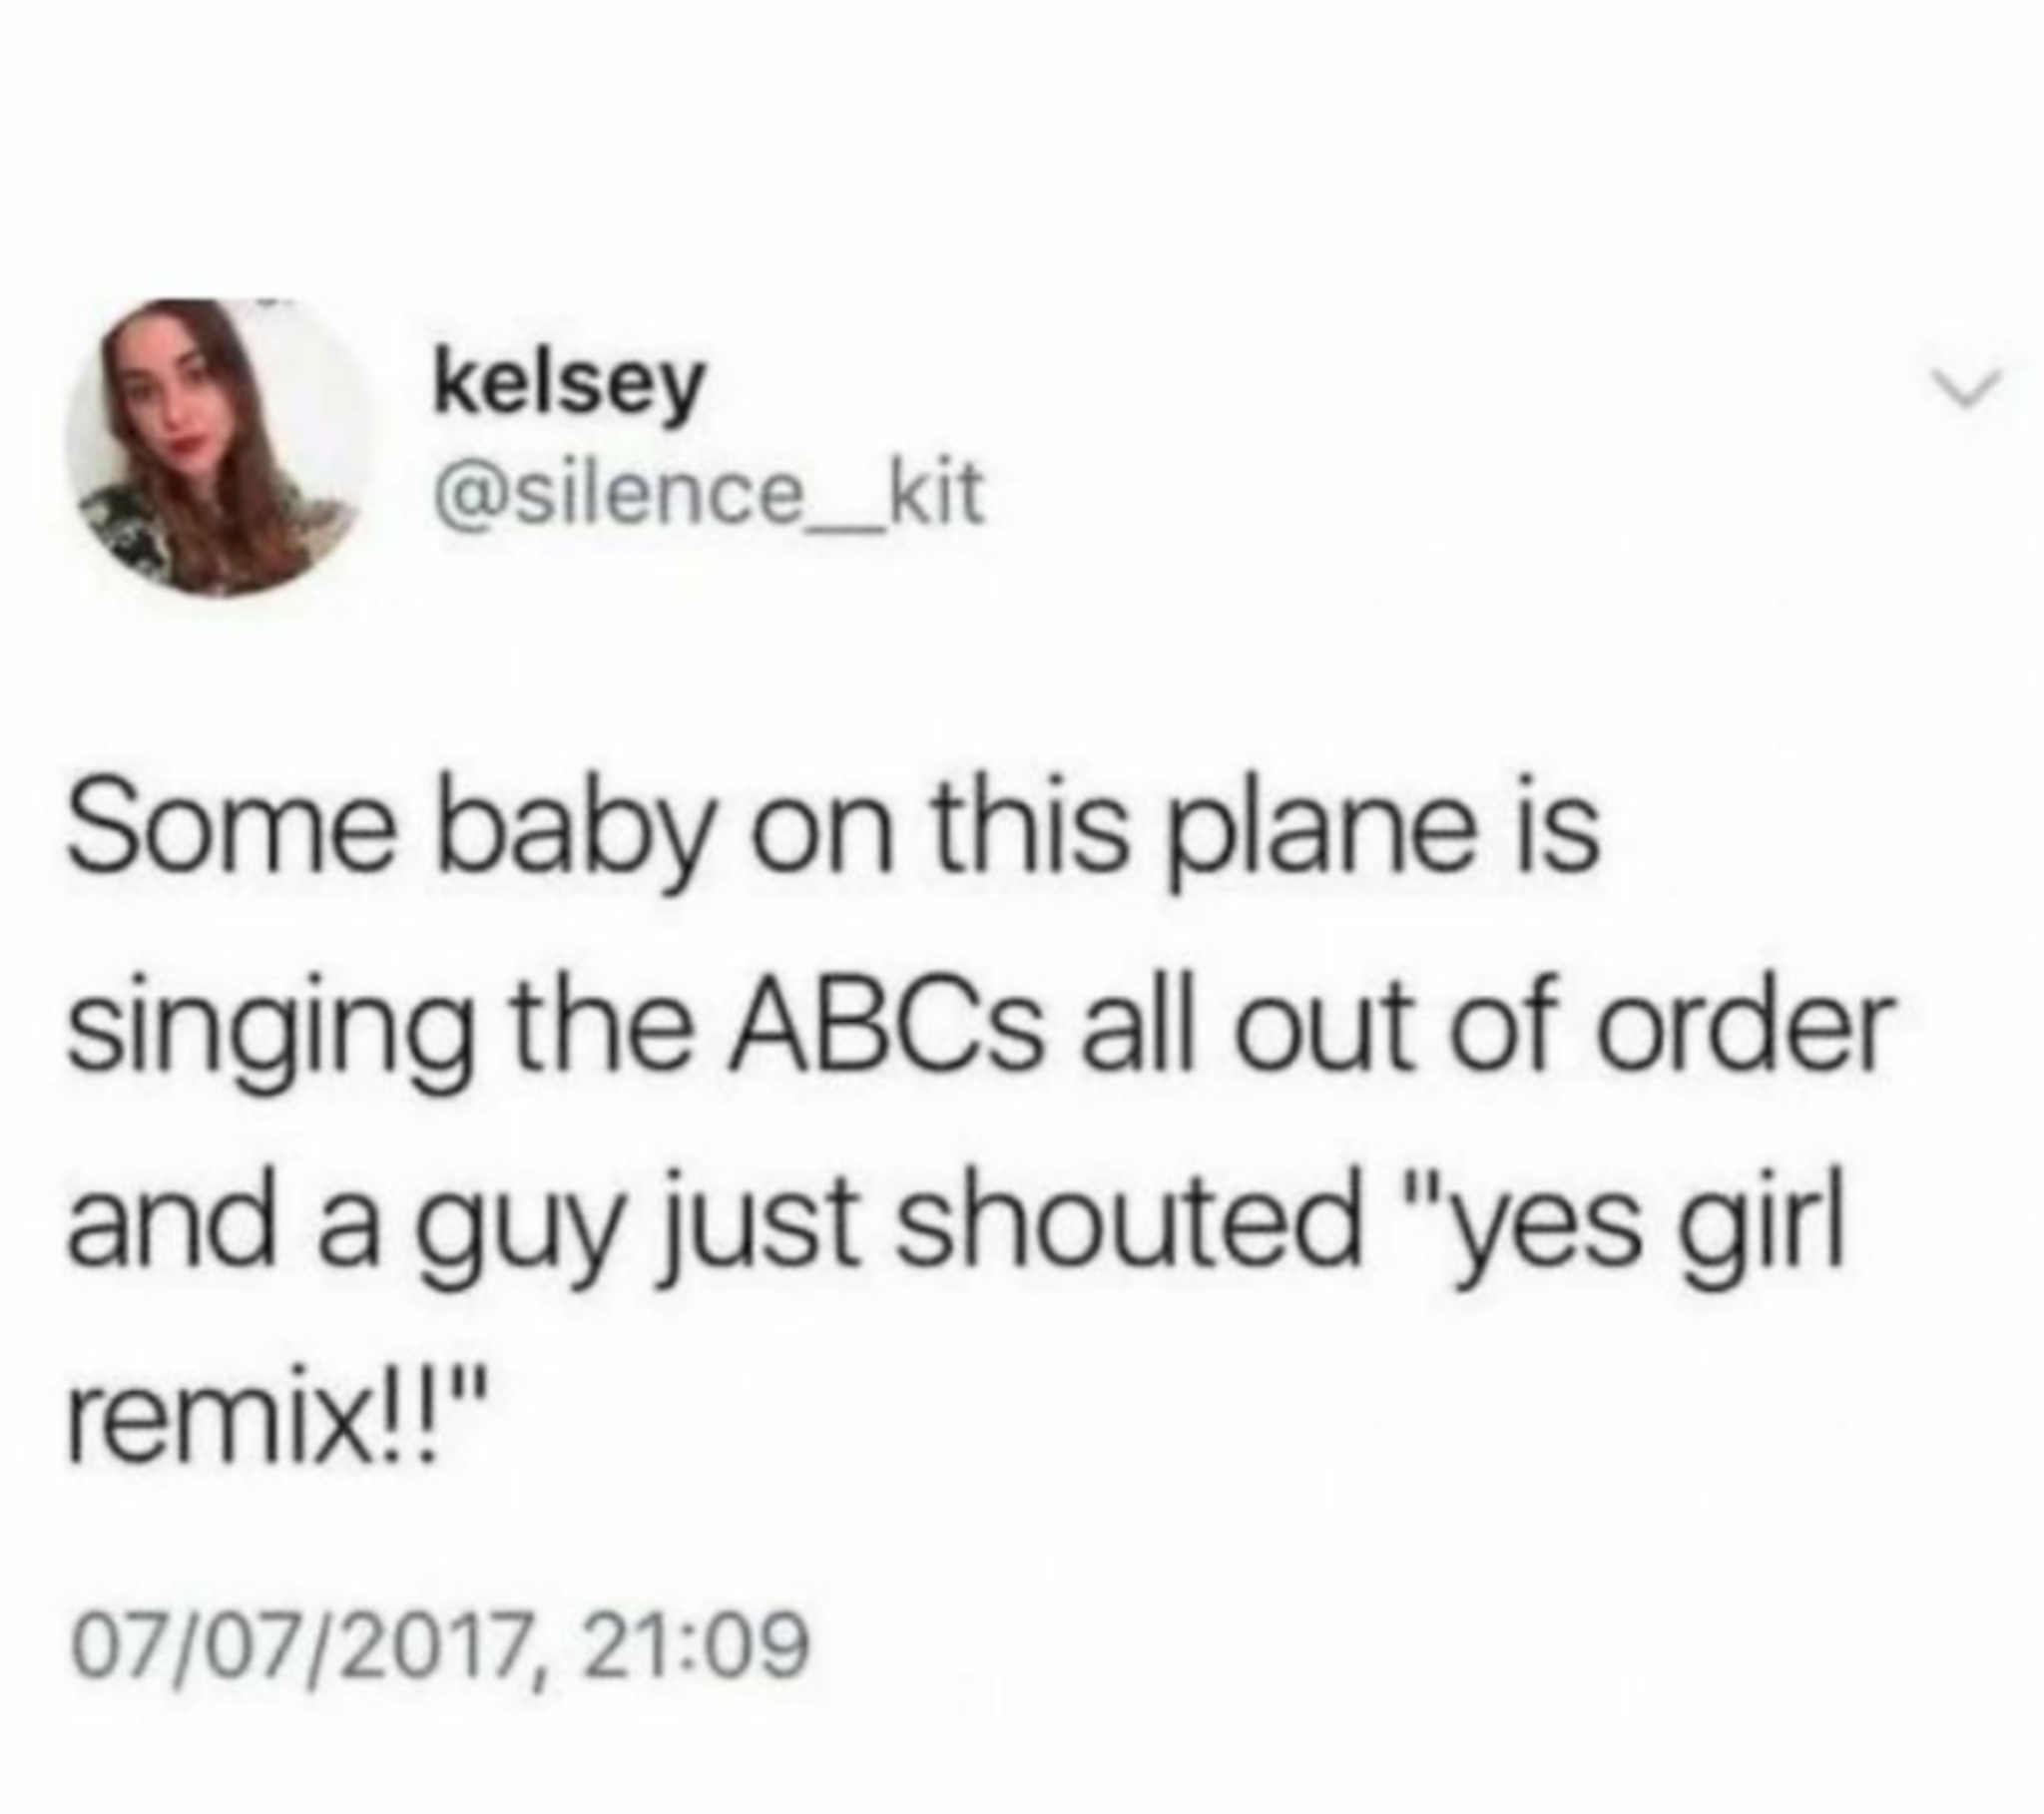 funny pics and randoms - smile - kelsey Some baby on this plane is singing the ABCs all out of order and a guy just shouted "yes girl remix!!" 07072017,